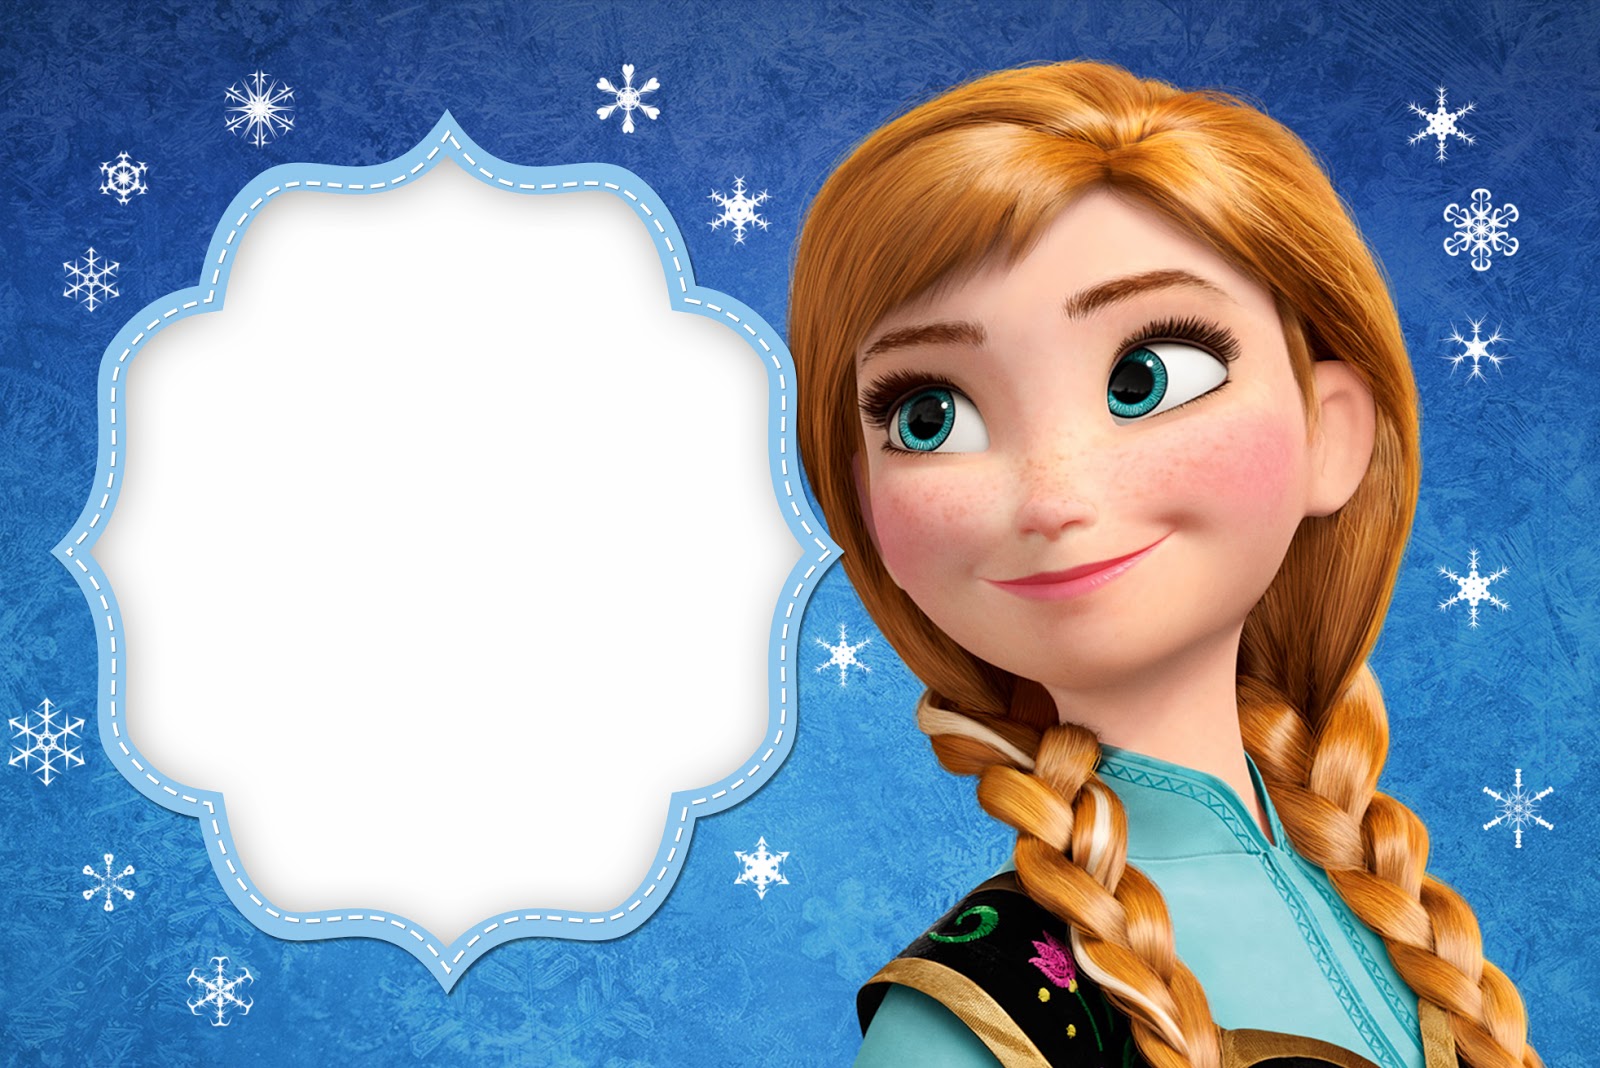 Frozen Free Printable Cards Or Party Invitations Is It For